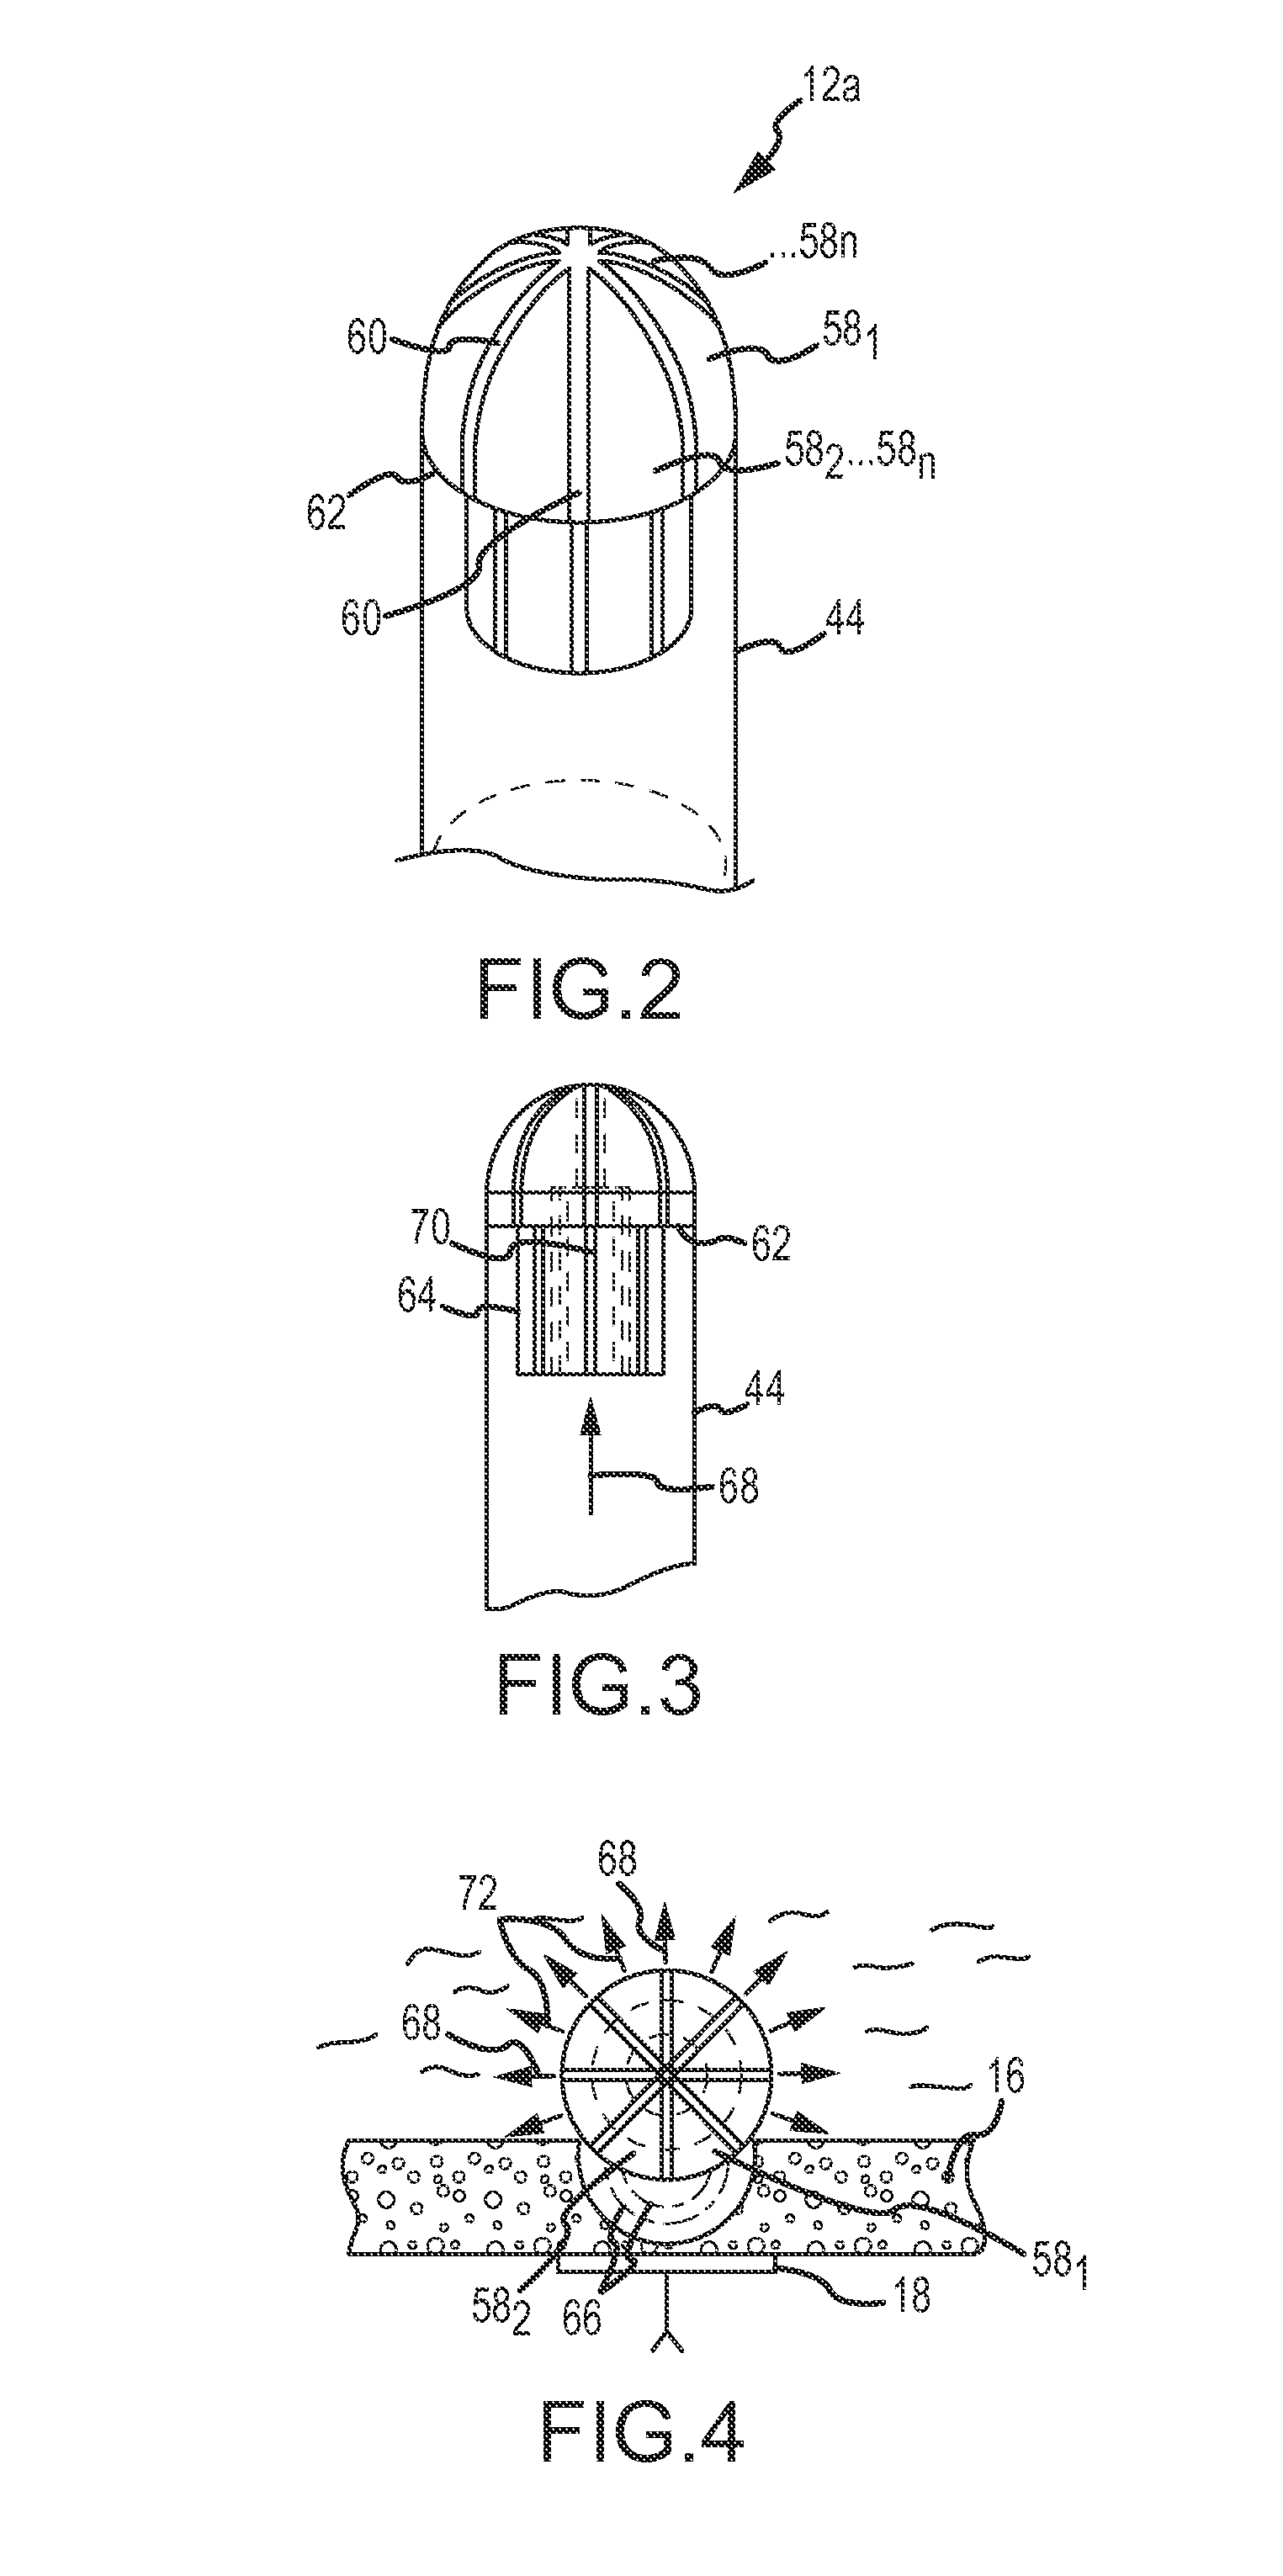 System for electroporation therapy